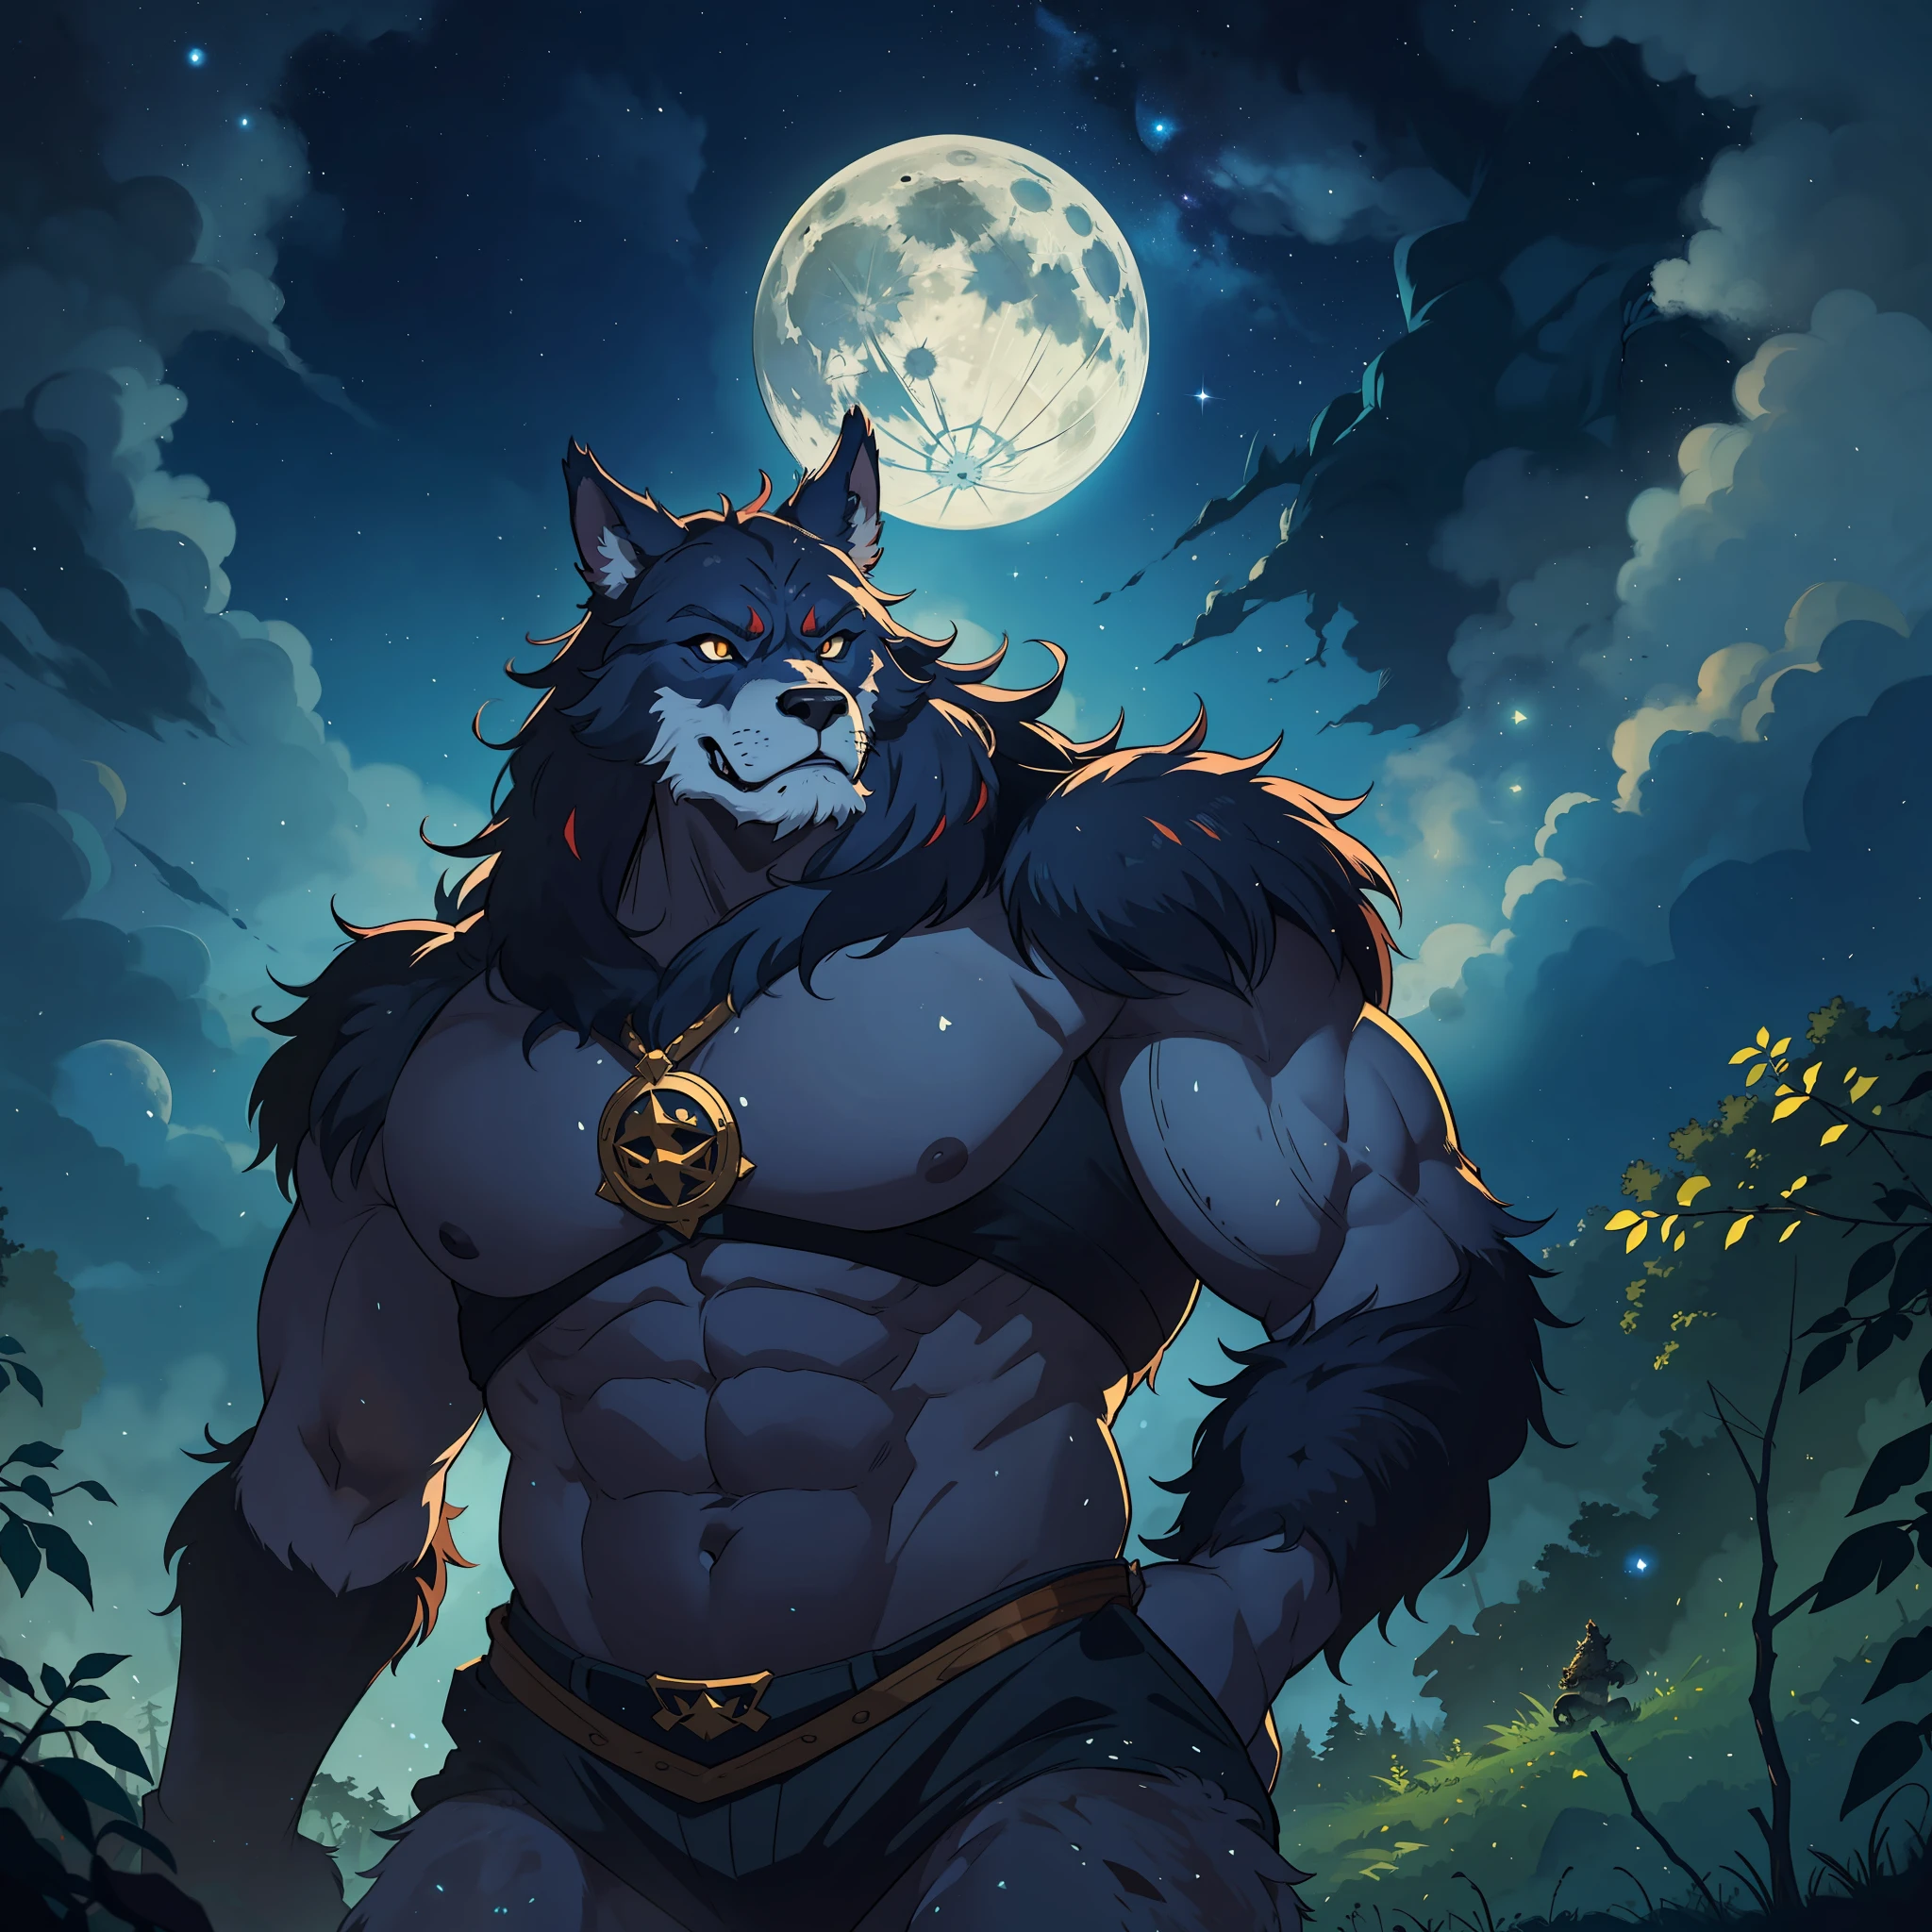 A werewolf with a wide and large body, a beast, he is in the middle of the forest, the full moon and an impressive starry sky in the background medieval RPG